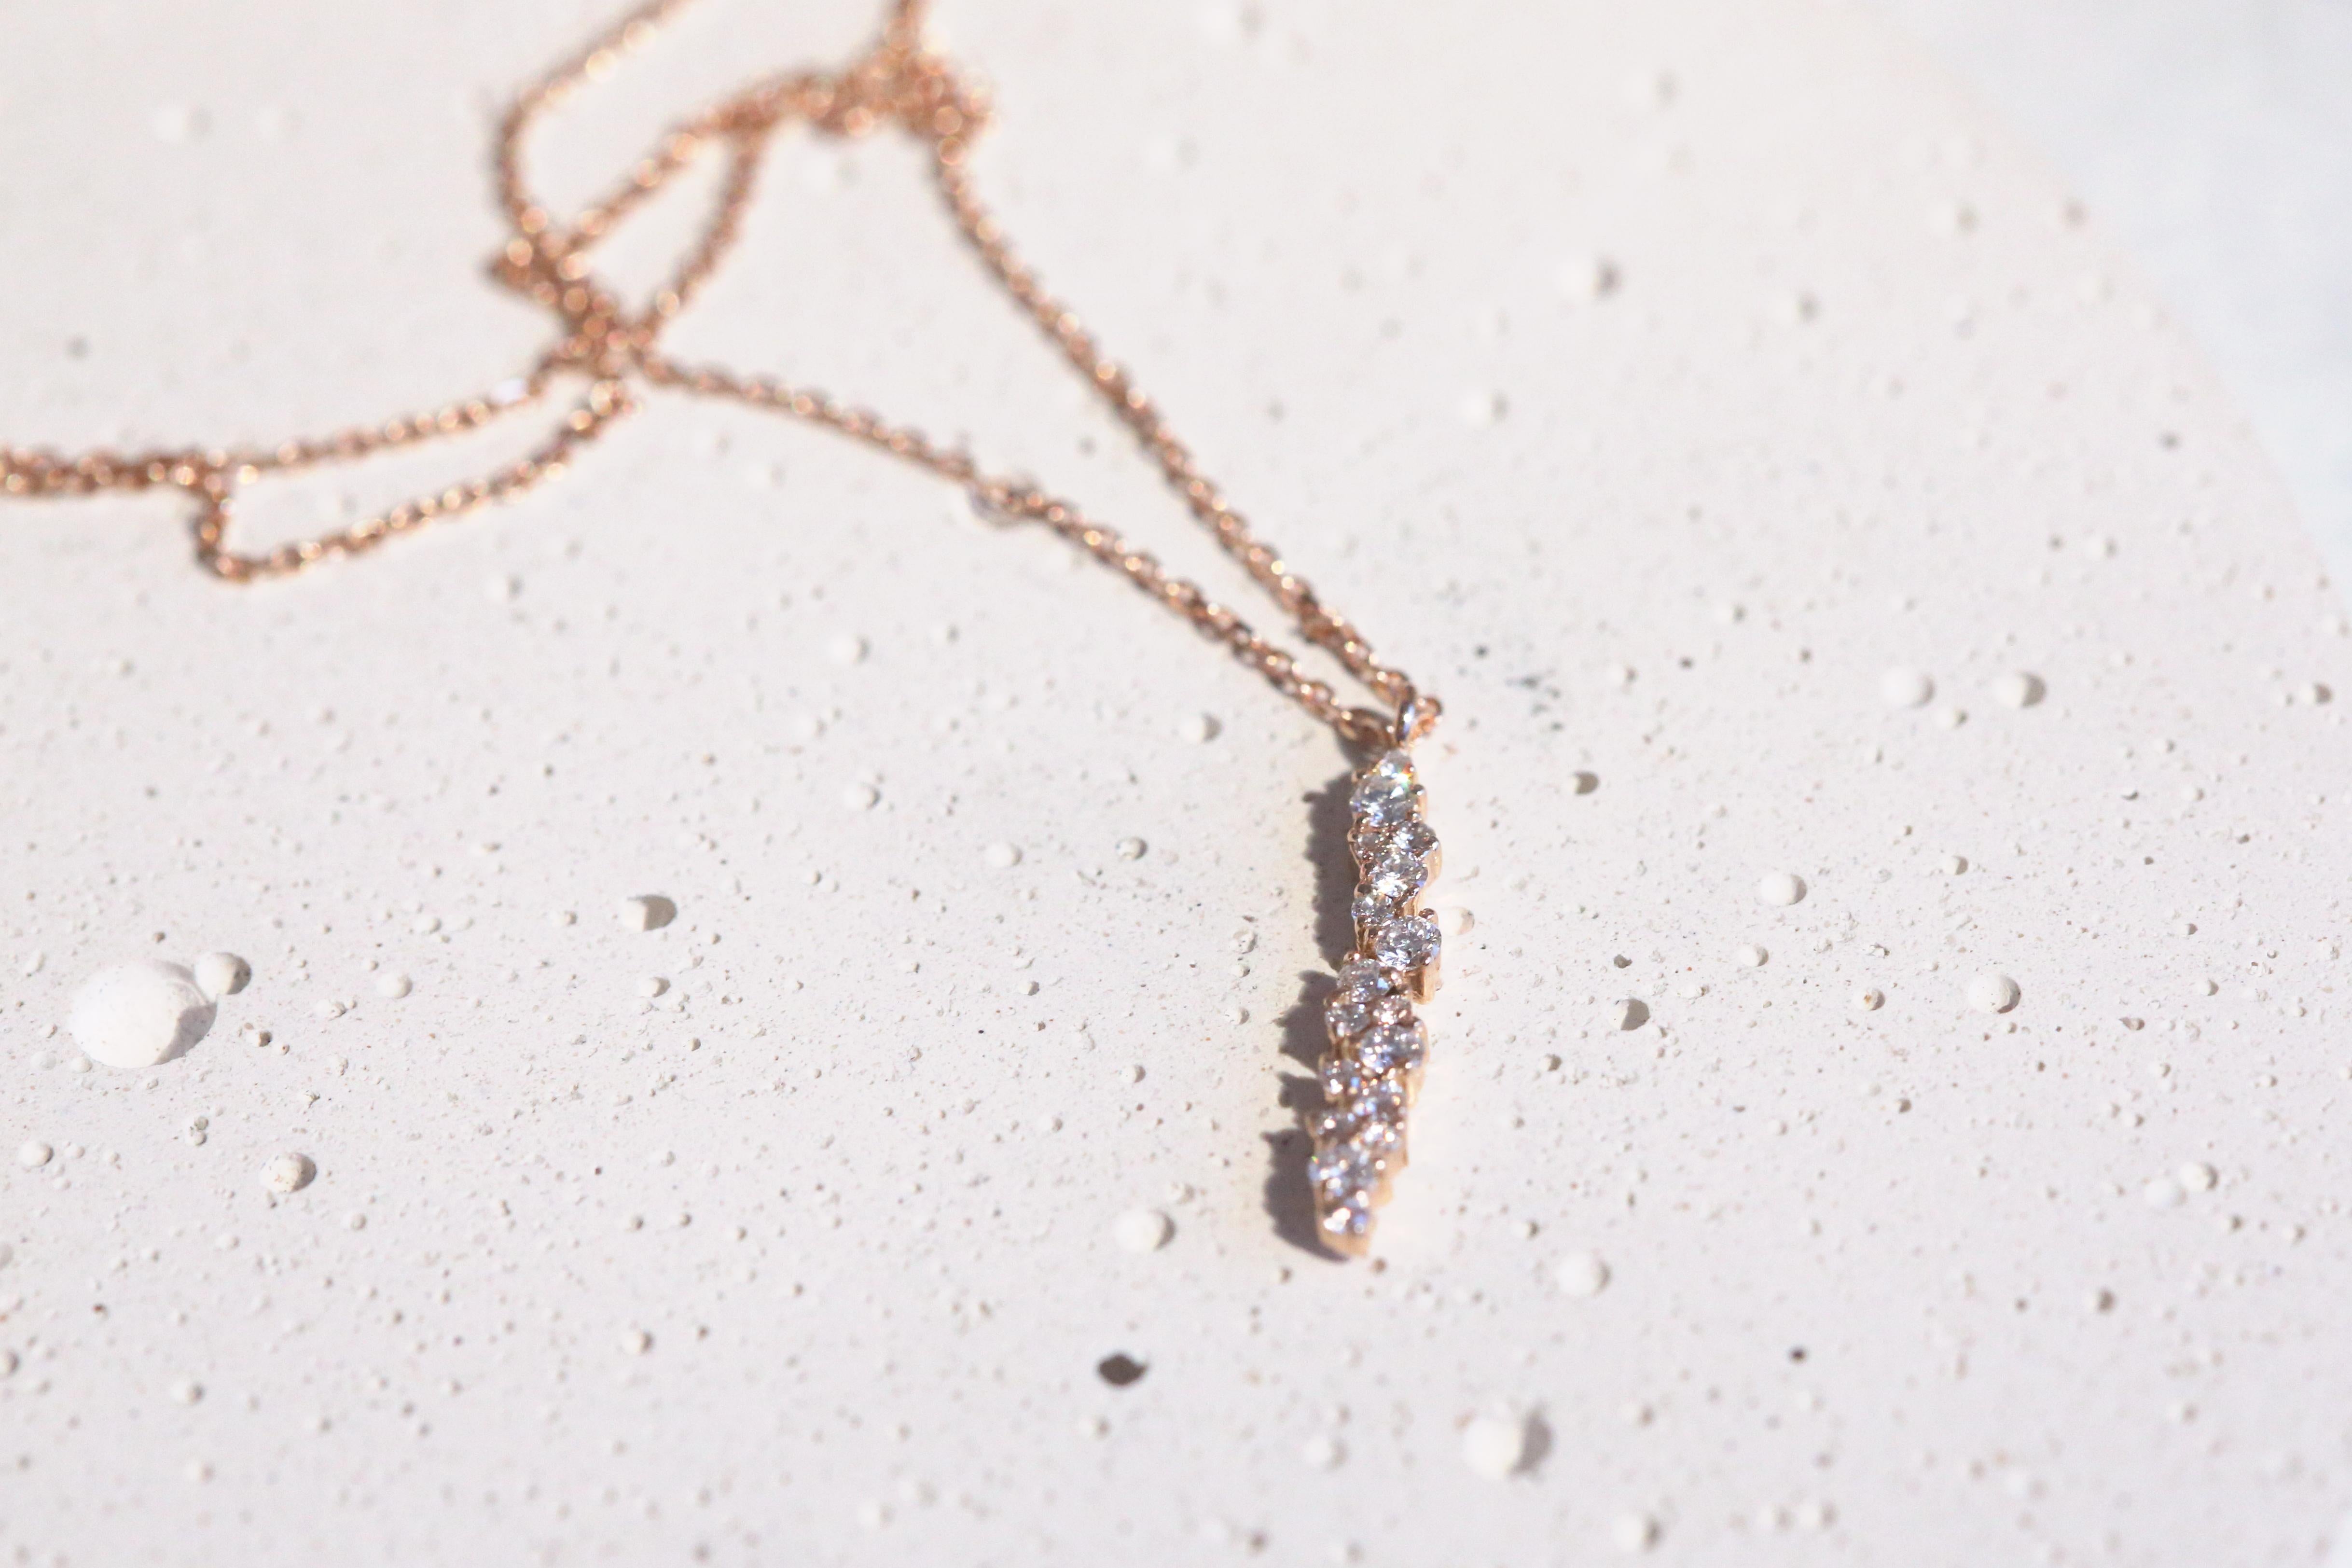 The Drop Diamonds necklace features 0.37ct of white diamonds set in 18k gold.